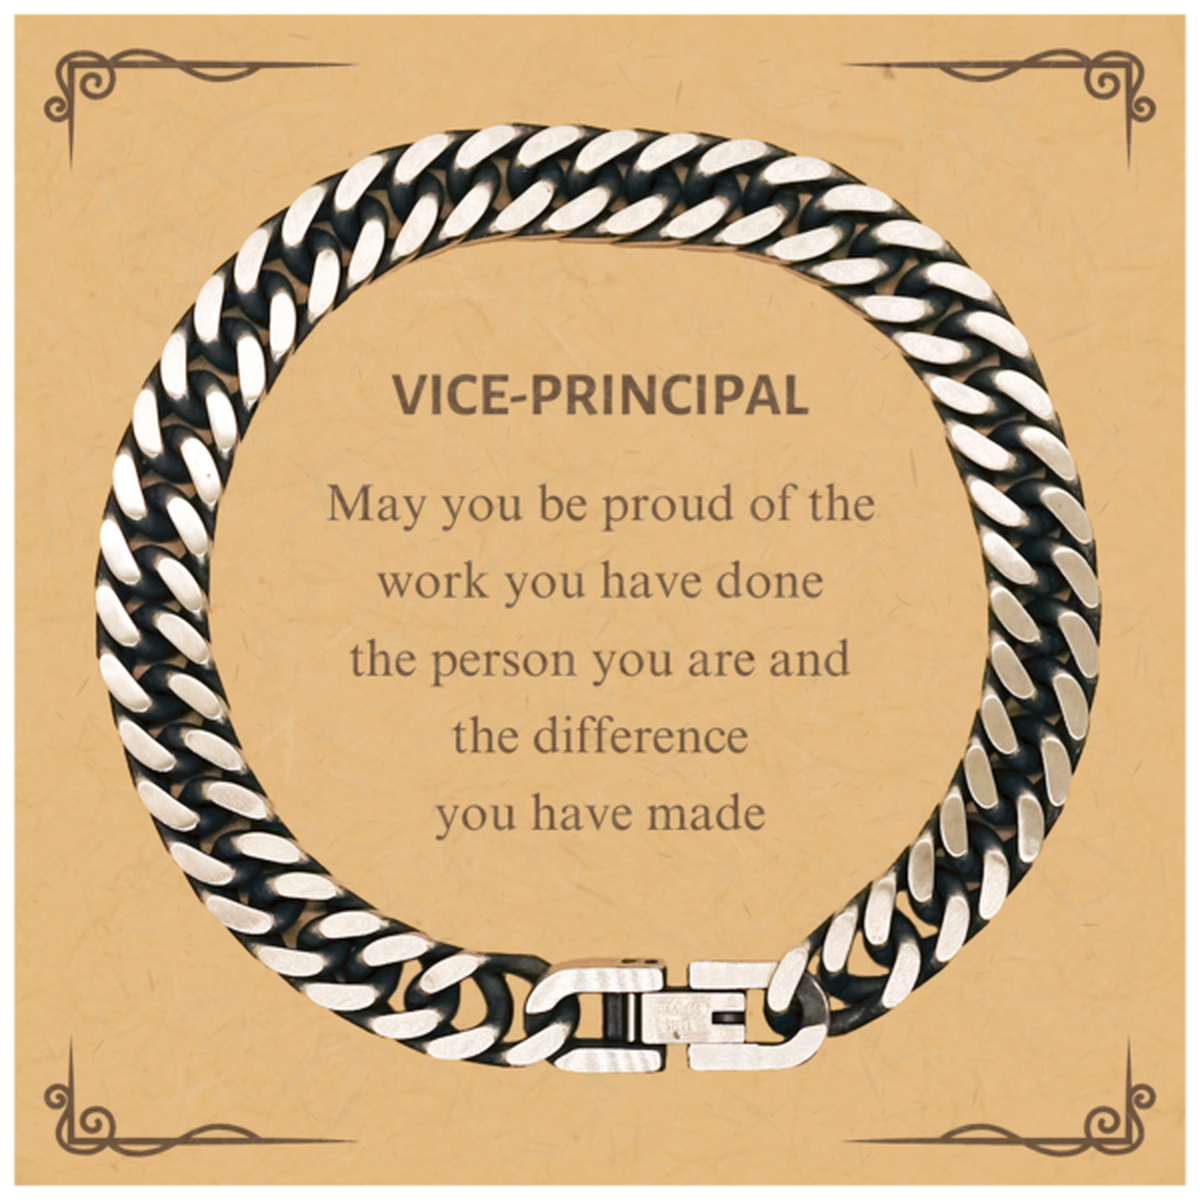 Vice-principal May you be proud of the work you have done, Retirement Vice-principal Cuban Link Chain Bracelet for Colleague Appreciation Gifts Amazing for Vice-principal